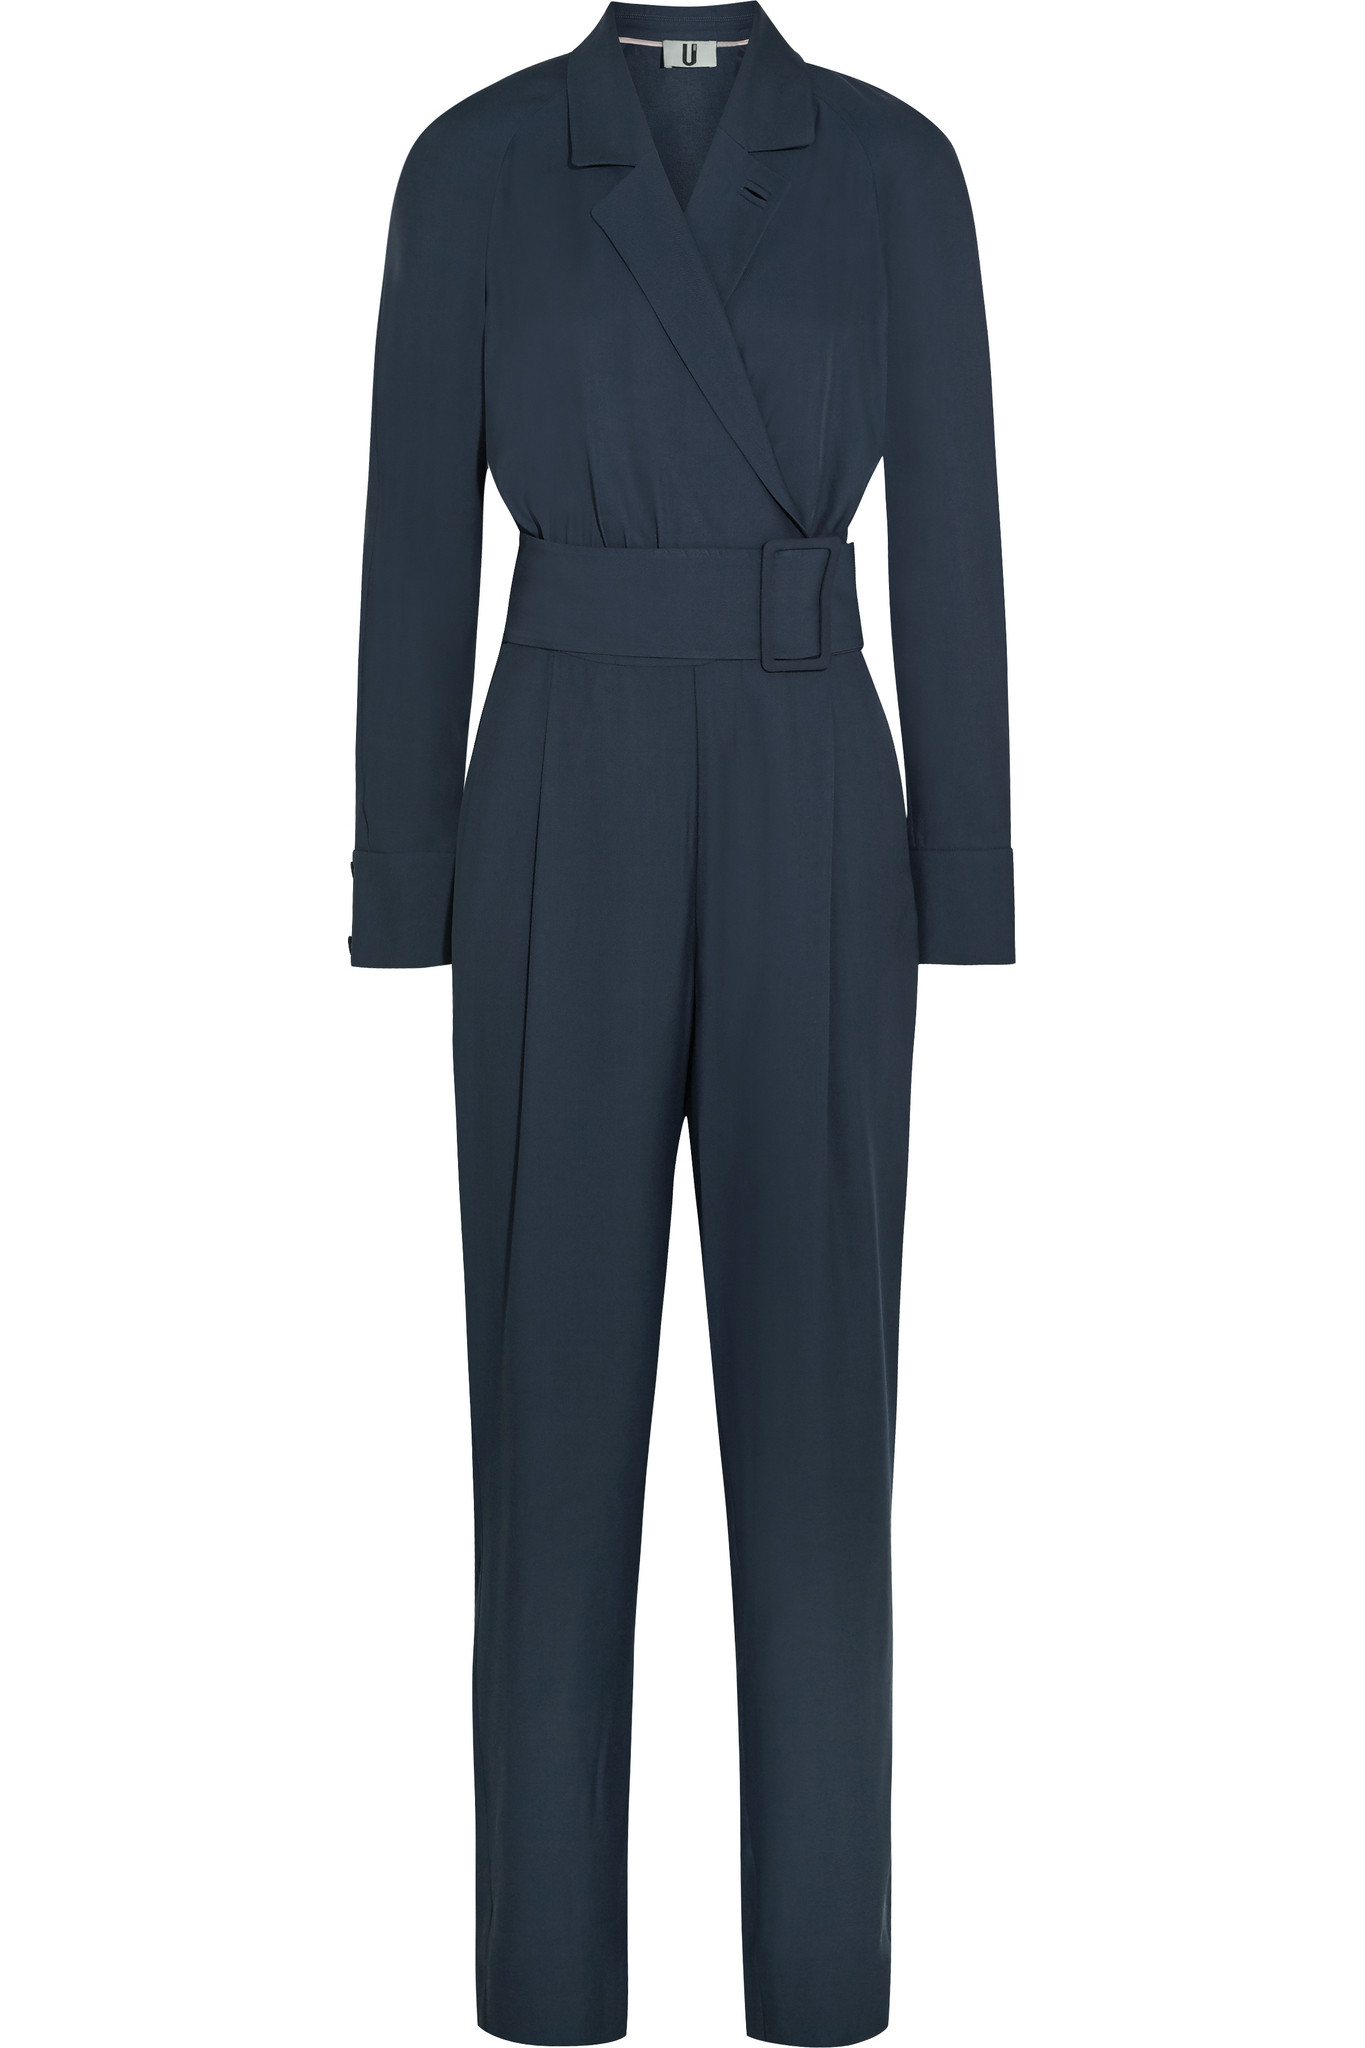 Topshop Unique Coterill Twill Jumpsuit in Navy (Blue) - Lyst